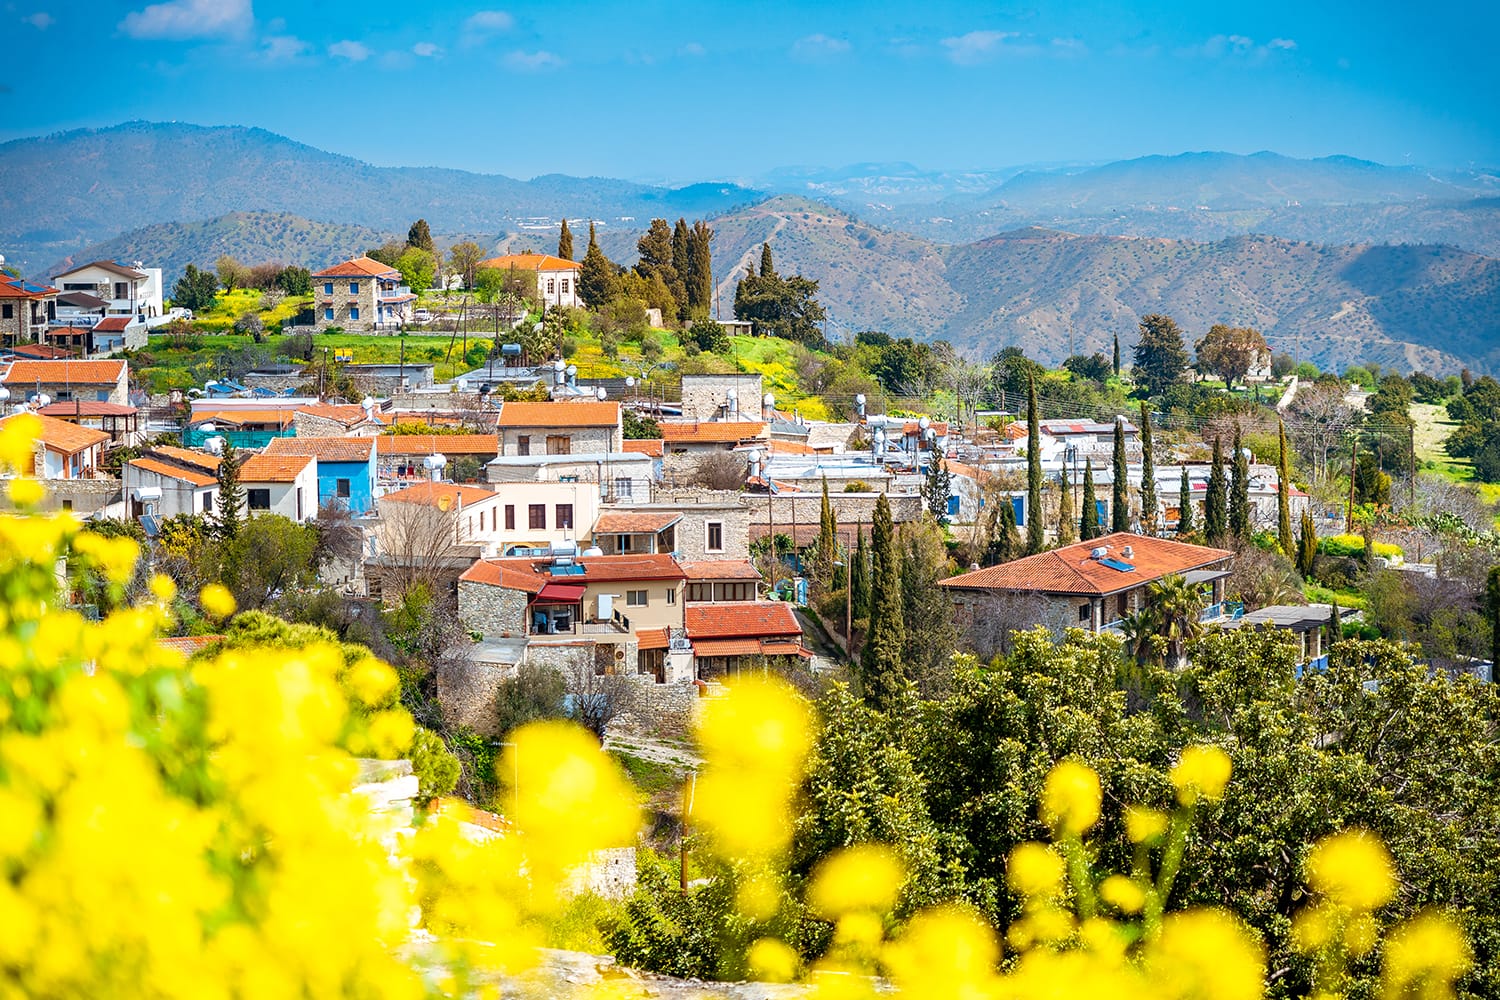 Amazing view of famous landmark tourist destination valley Pano Lefkara village, Larnaca, Cyprus known by ceramic tiled house roofs and Greek orthodox church